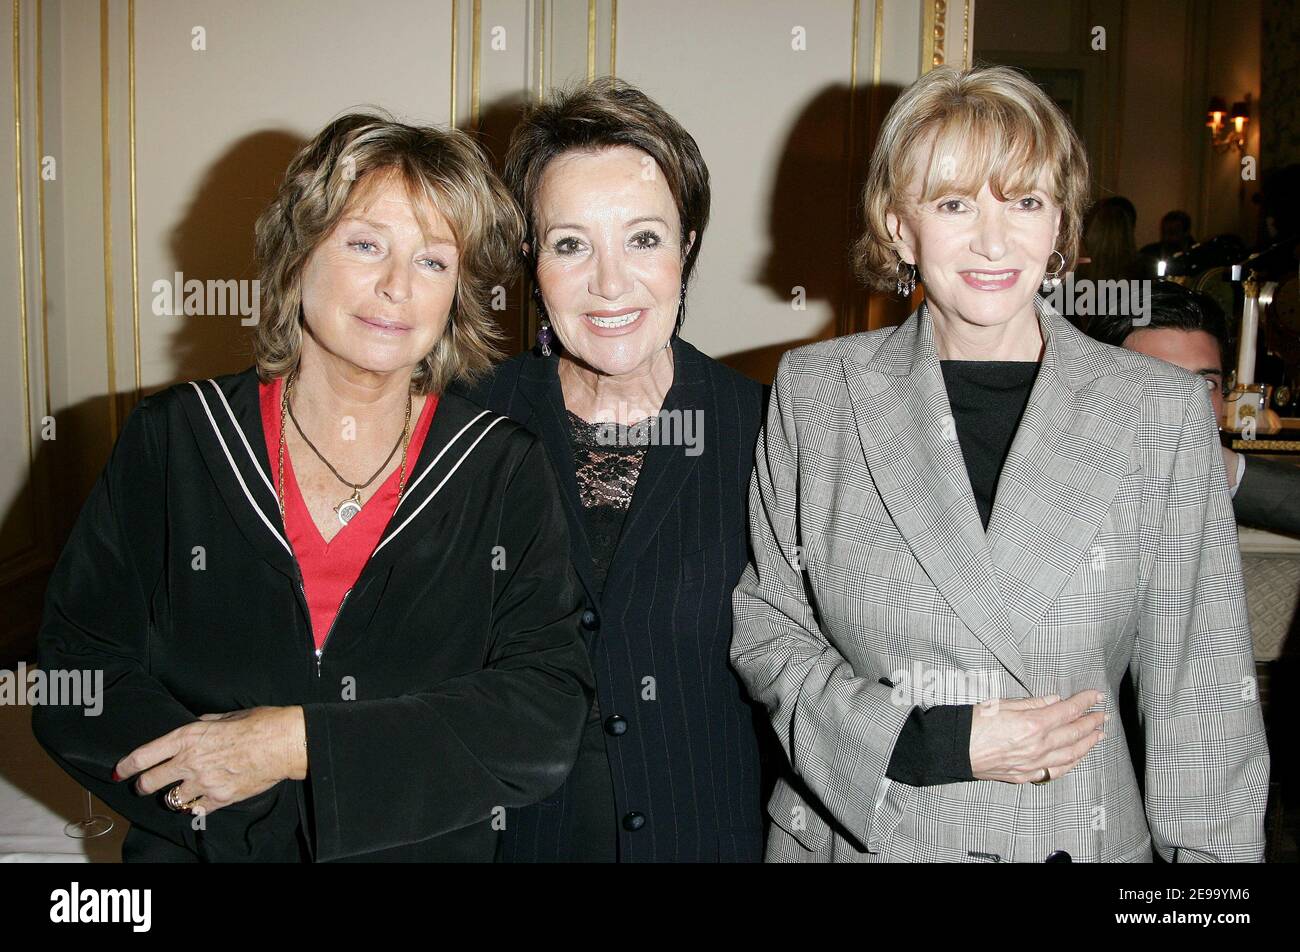 French director Daniele Thompson, French clairvoyant Yagel Didier and French TV presenter Eve Ruggieri attend the 'Carte Noire Cine Roman' ceremony at hotel Plaza Athenee in Paris, France on April 23, 2006. Photo by Laurent Zabulon/ABACAPRESS.COM. Stock Photo